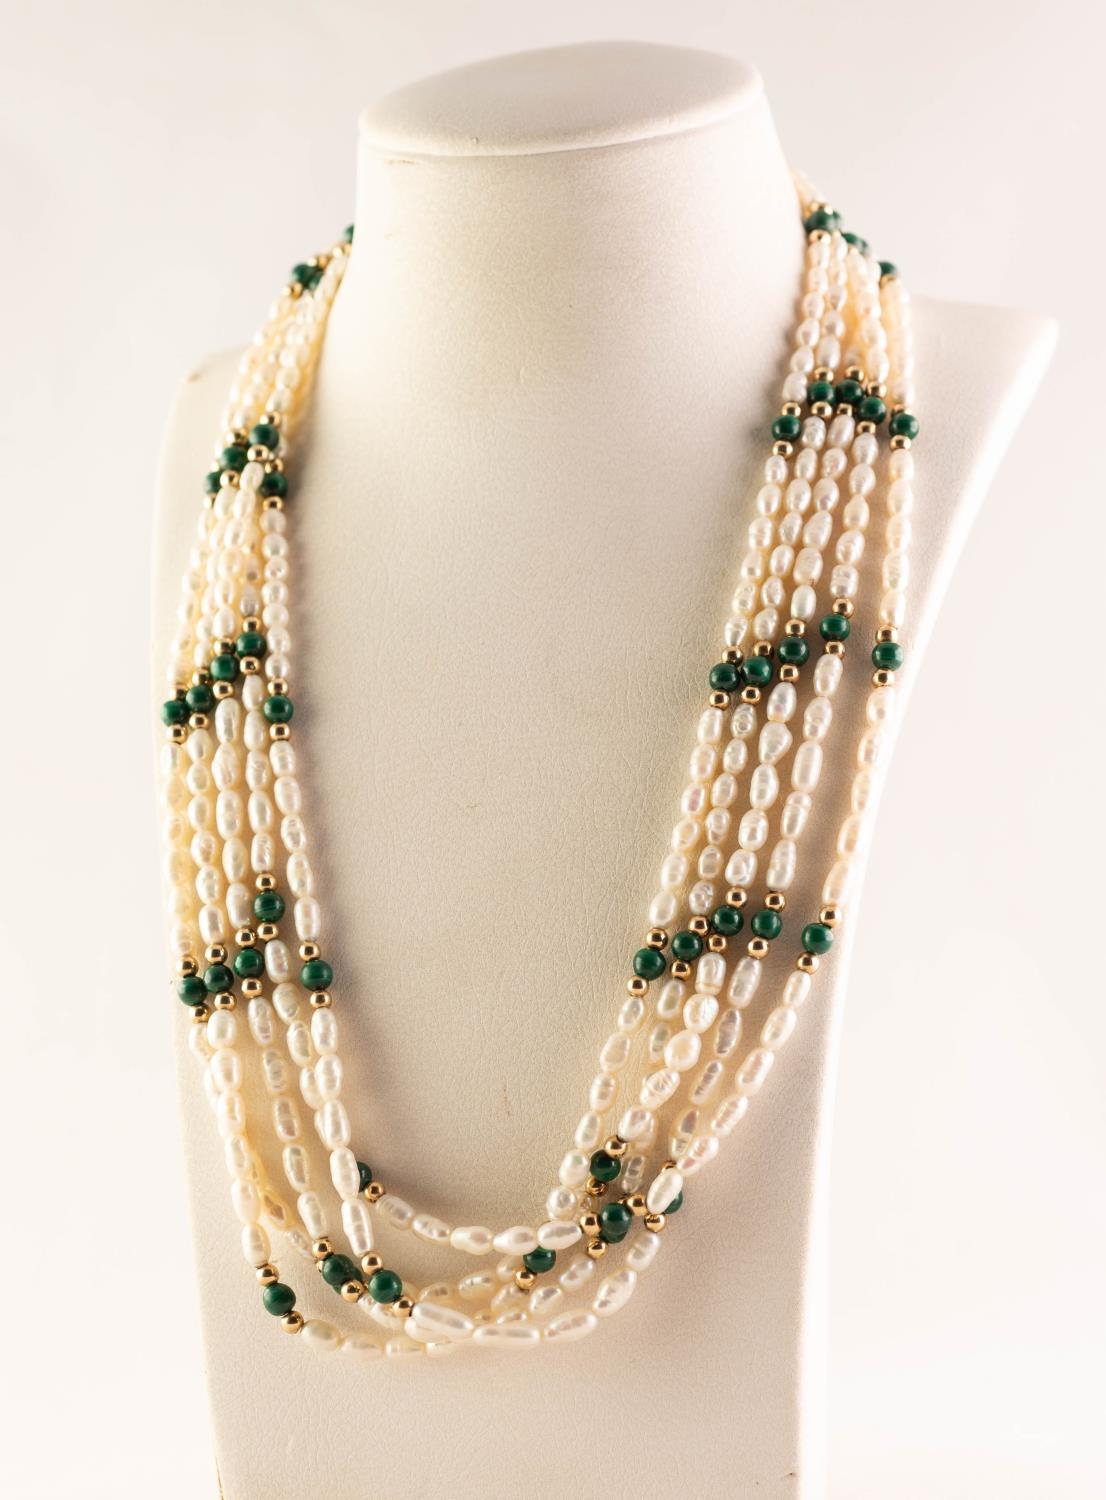 MULTI-STRAND FRESHWATER PEARL NECKLACE with 14K gold clasp and with gold and malachite bead spacers